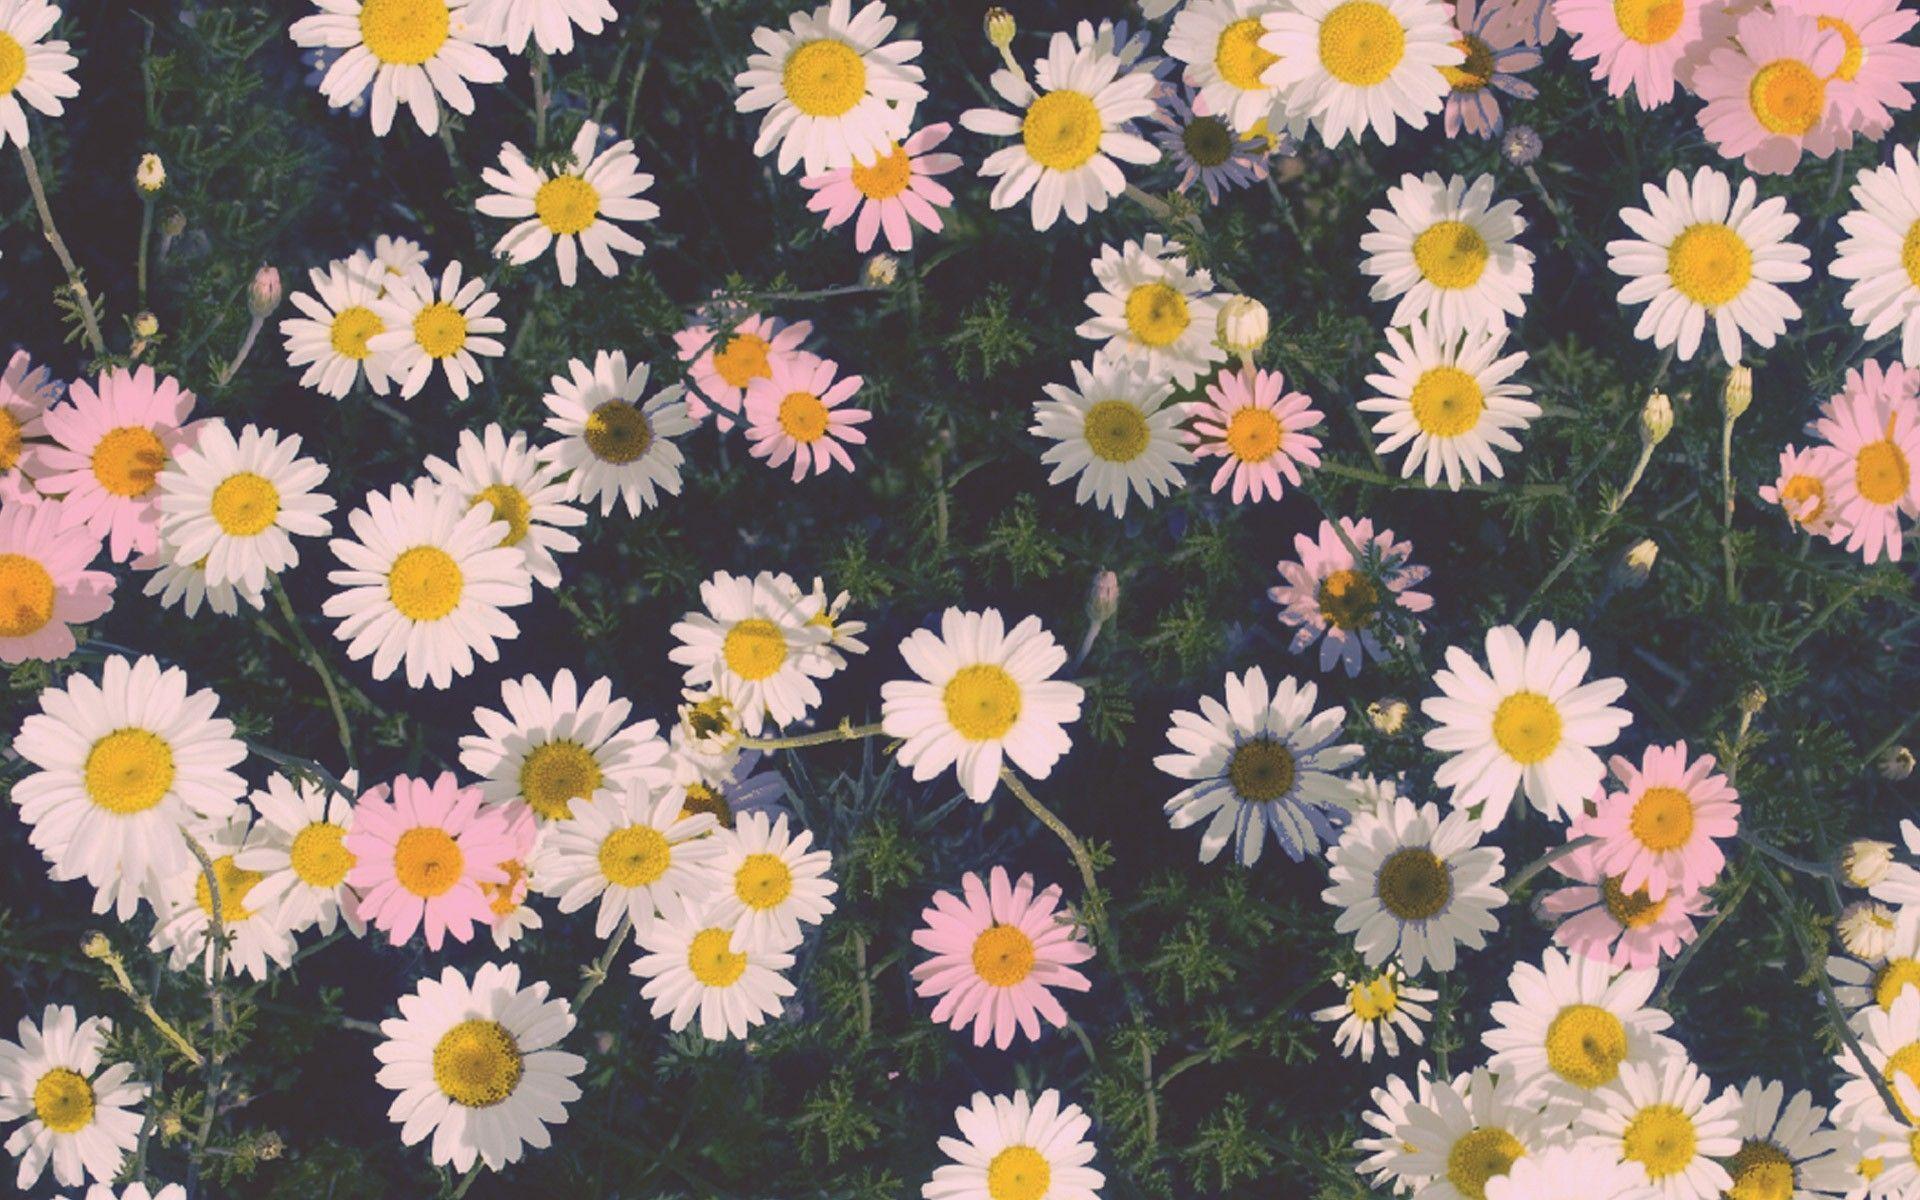 Daisy Laptop Wallpapers Top Free Daisy Laptop Backgrounds Wallpaperaccess Find the best and most beautiful flower wallpapers and images! daisy laptop wallpapers top free